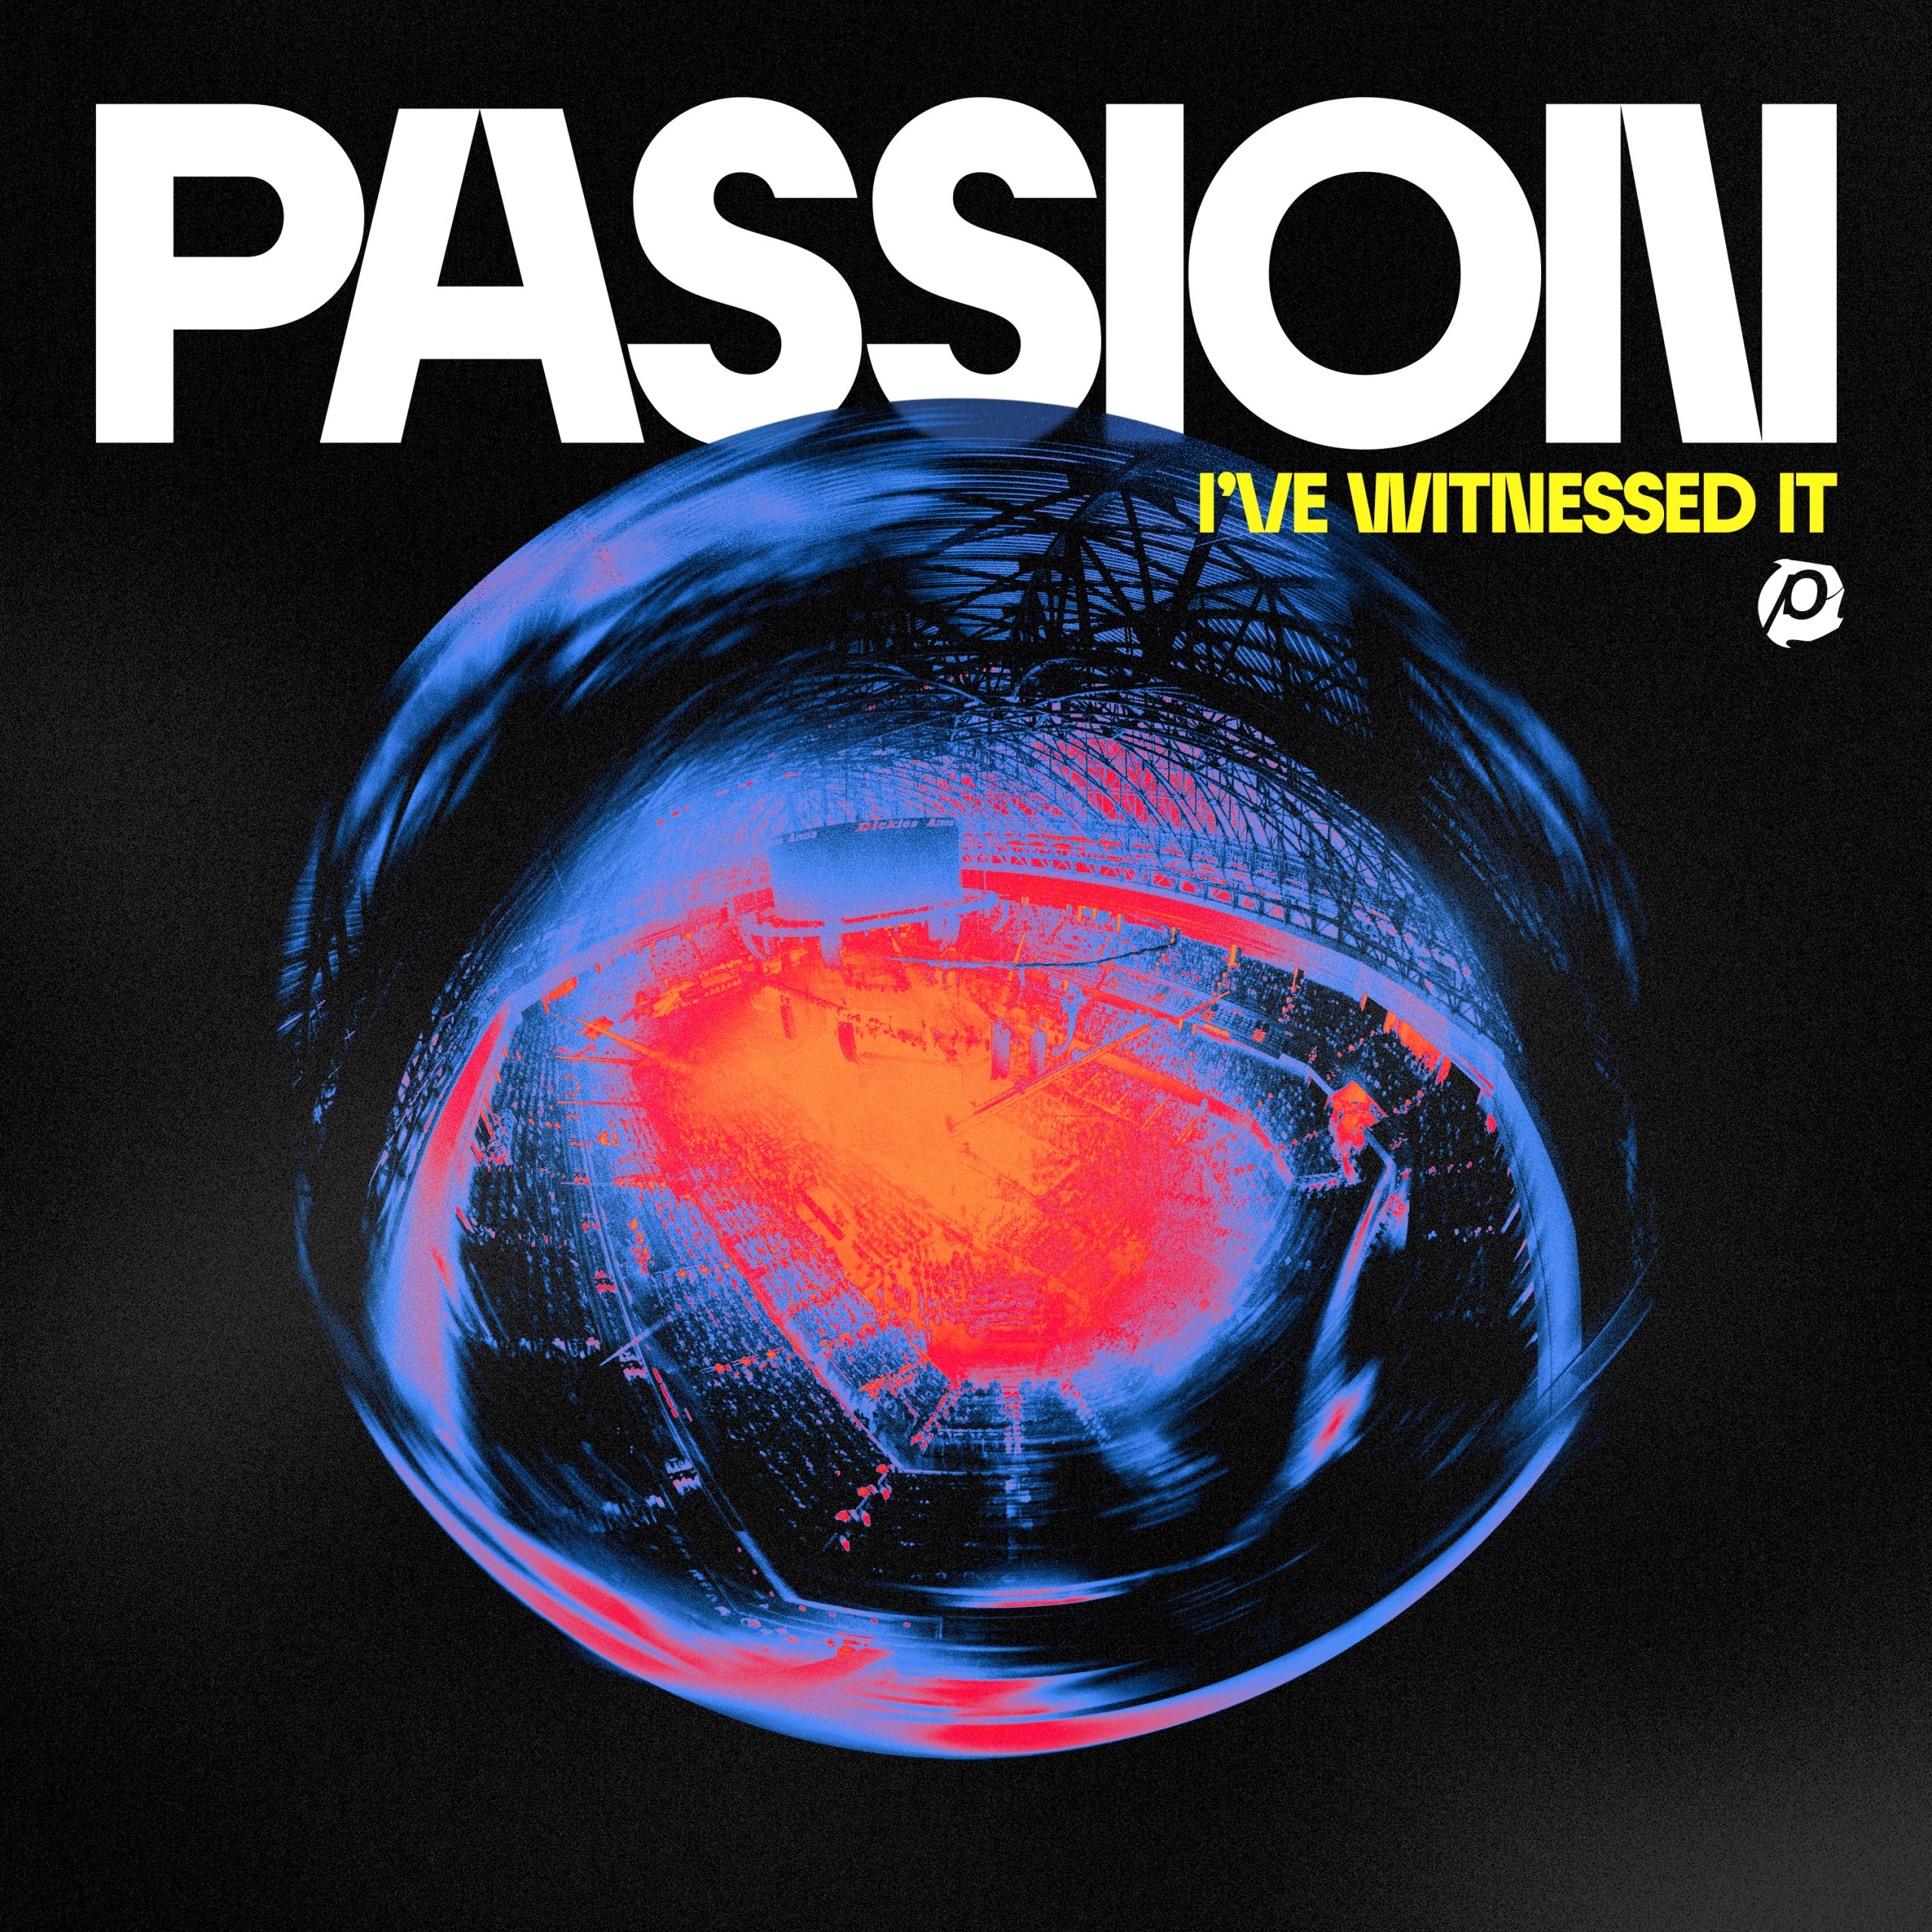 PASSION RELEASES NEW ALBUM I’VE WITNESSED IT RECORDED LIVE AT